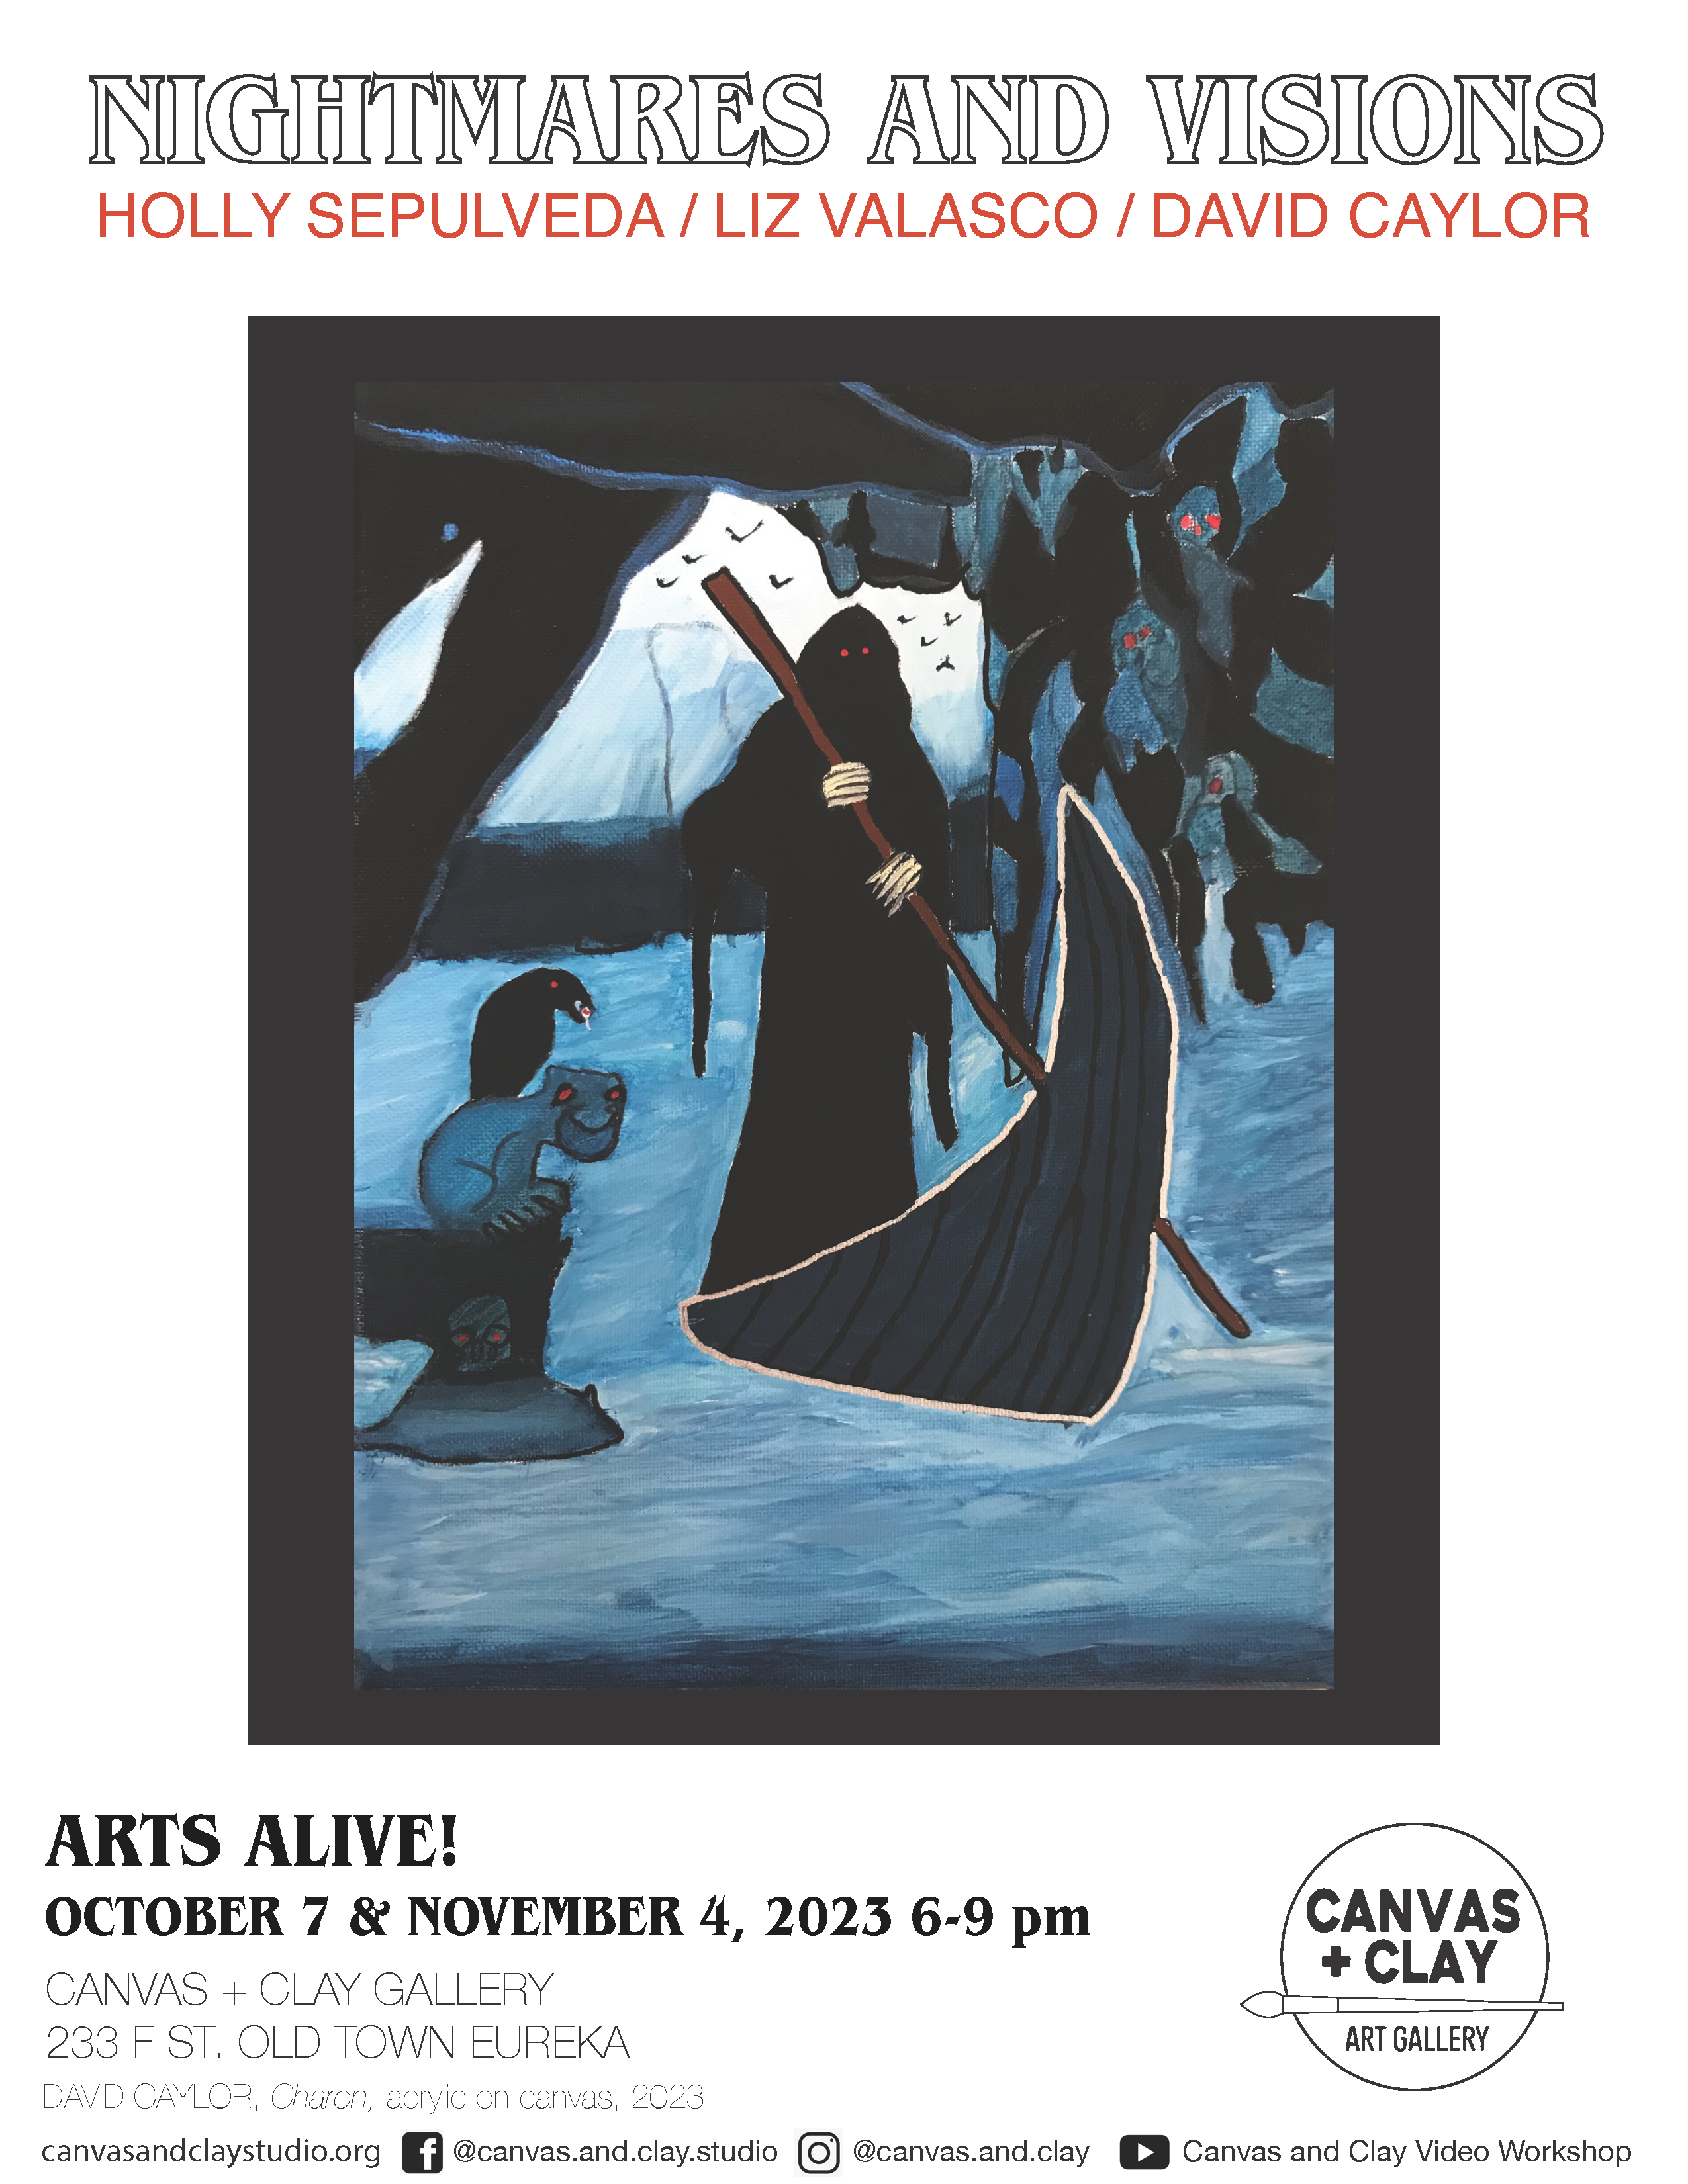 Nightmares and Visions by Holly Sepulveda Liz Valasco and David Caylor poster for Arts Alive October 7th and november 4th from 6 to 9 pm at Canvas and Clay Gallery at 233 F street old town Eurekaa